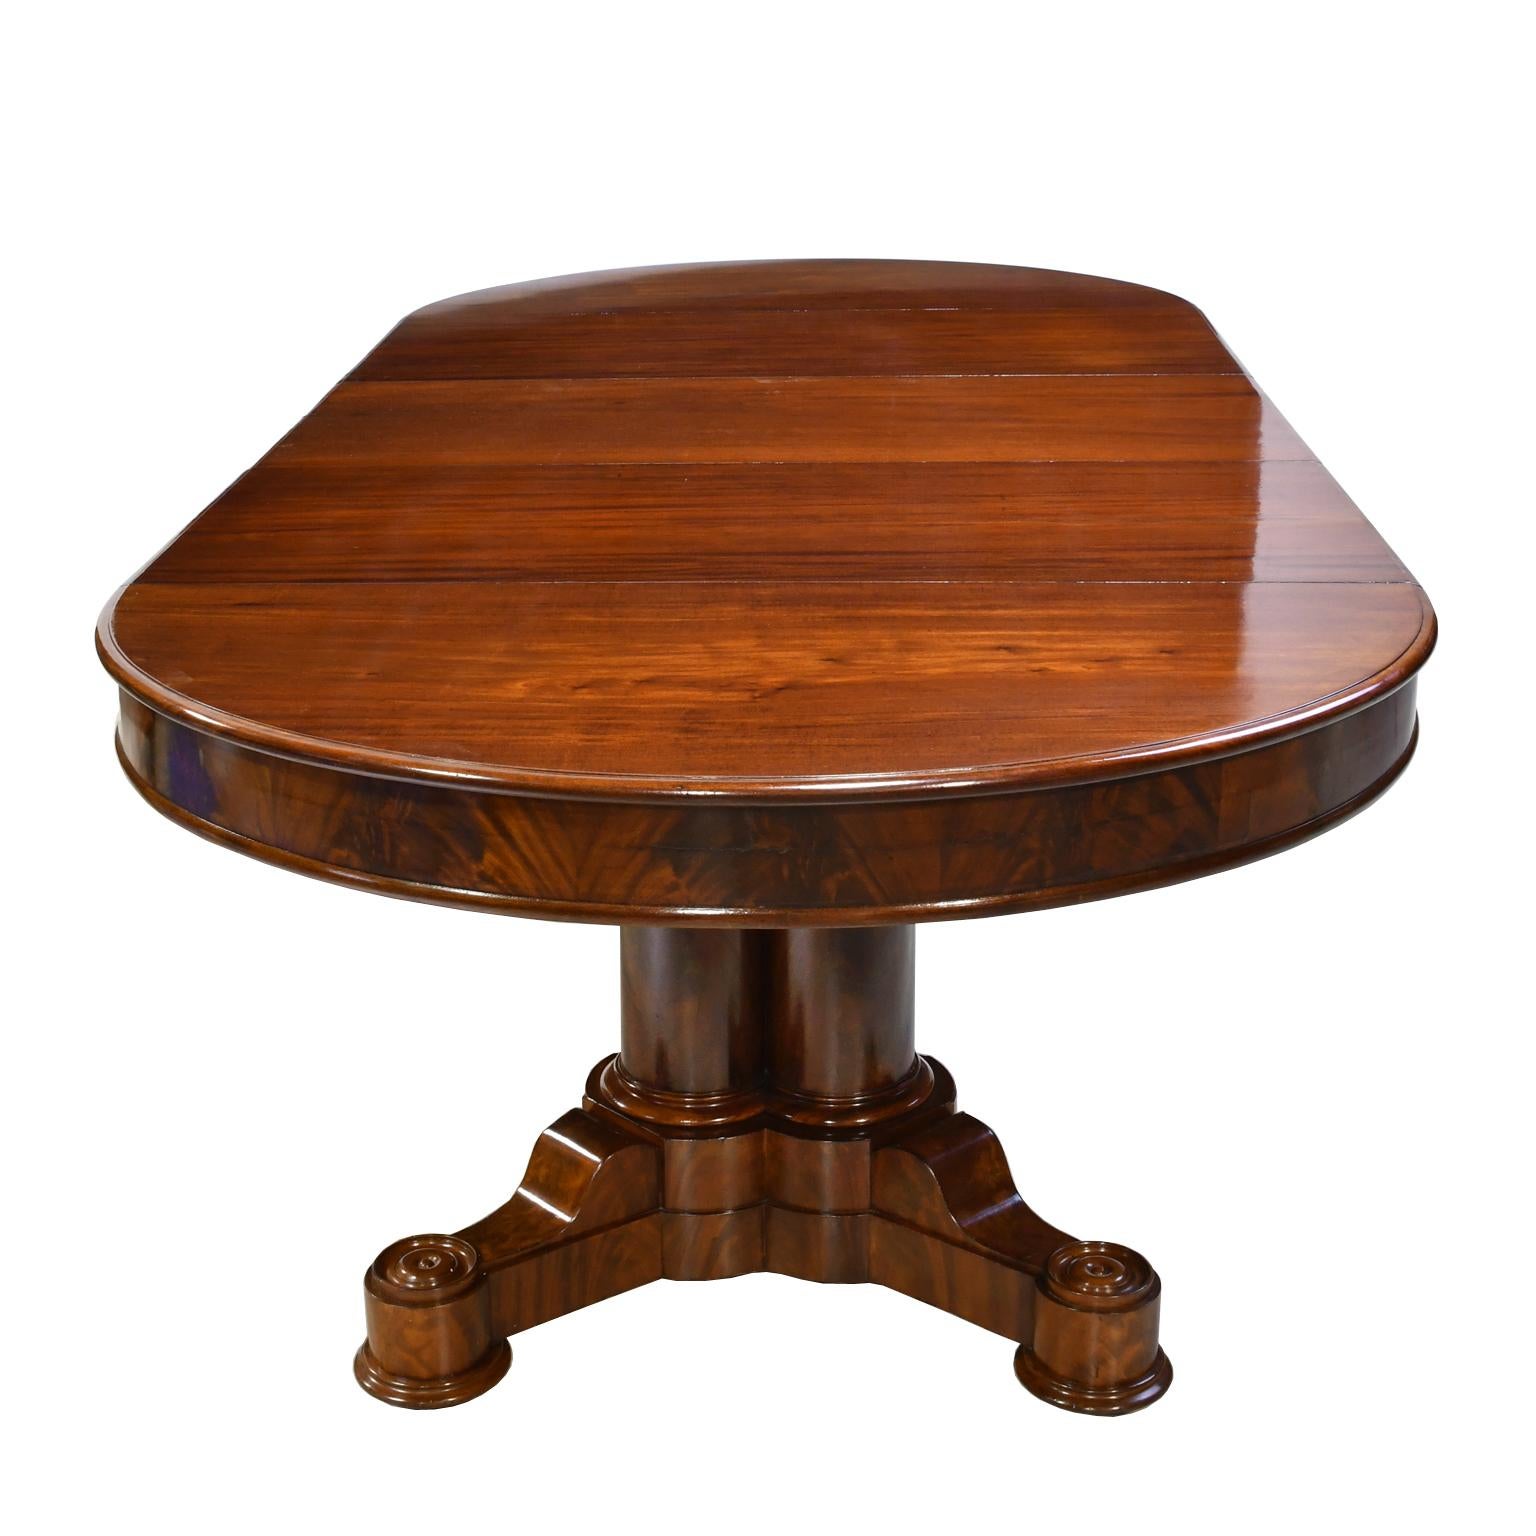 American Empire Oval Extension Dining Table in Mahogany with Pedestal Base 3